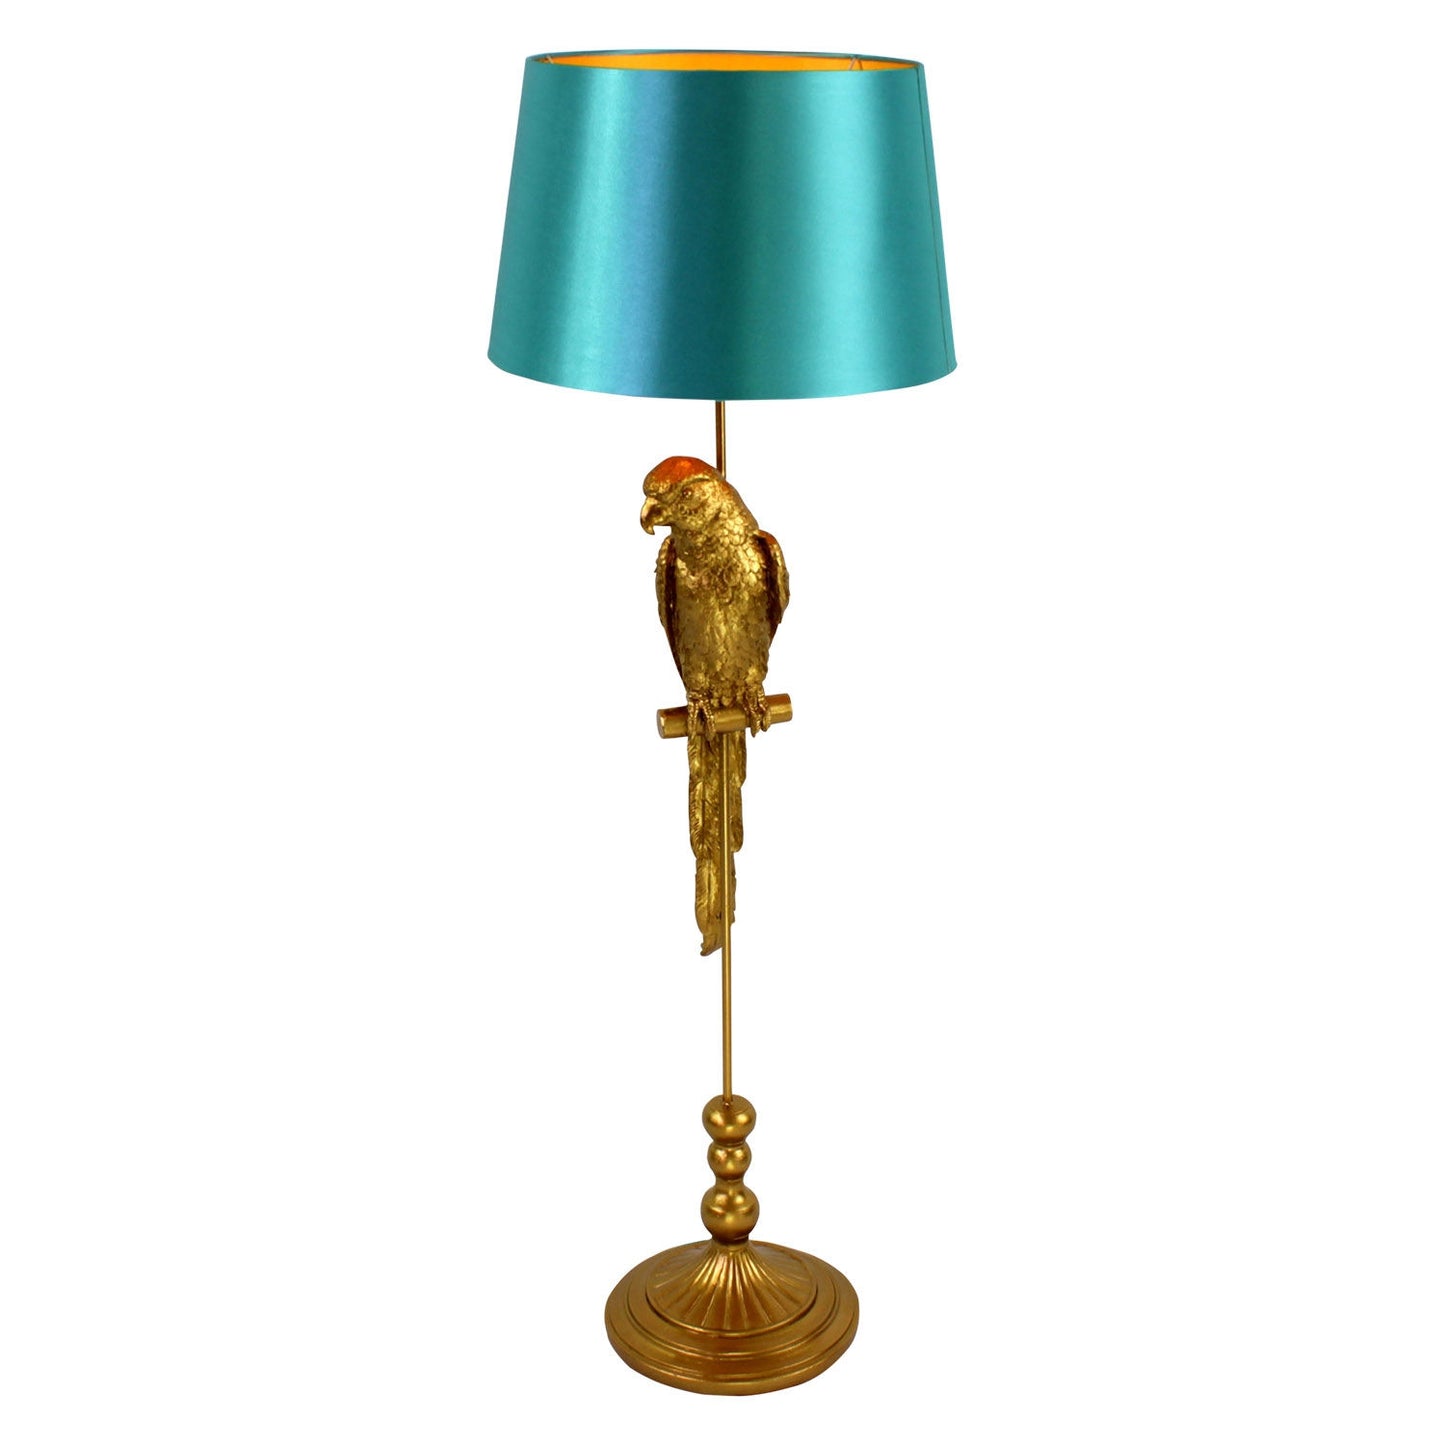 Parrot Tammy Floor Lamp, Gold / Turquoise